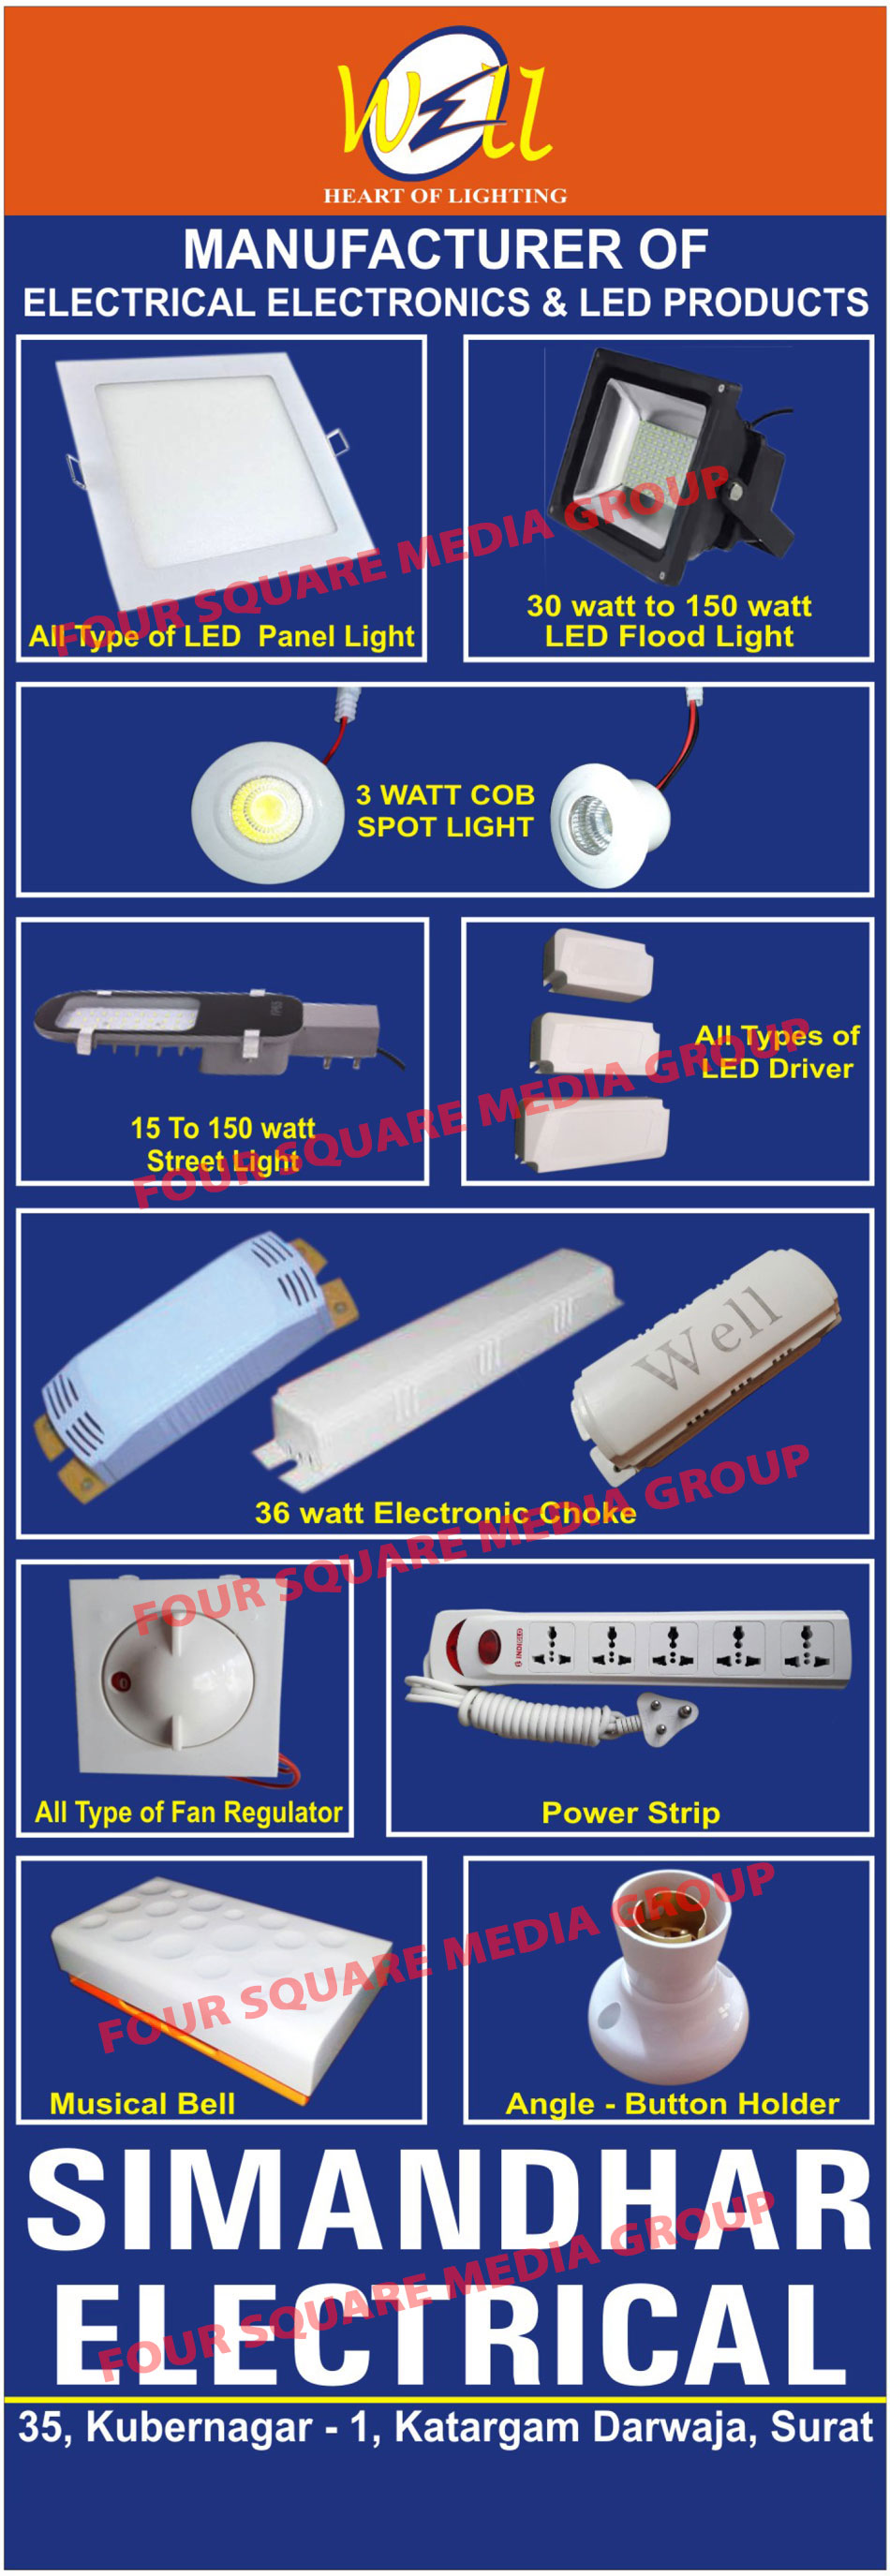 Electrical Products, Electronic Products, Led Products, Led Lights, Led Panel Lights, Led Flood Lights, COB Spot Lights, Street Lights, Led Drivers, Electronic Chokes, Fan Regulators, Power Strips, Musical Bells, Angle Button Holders